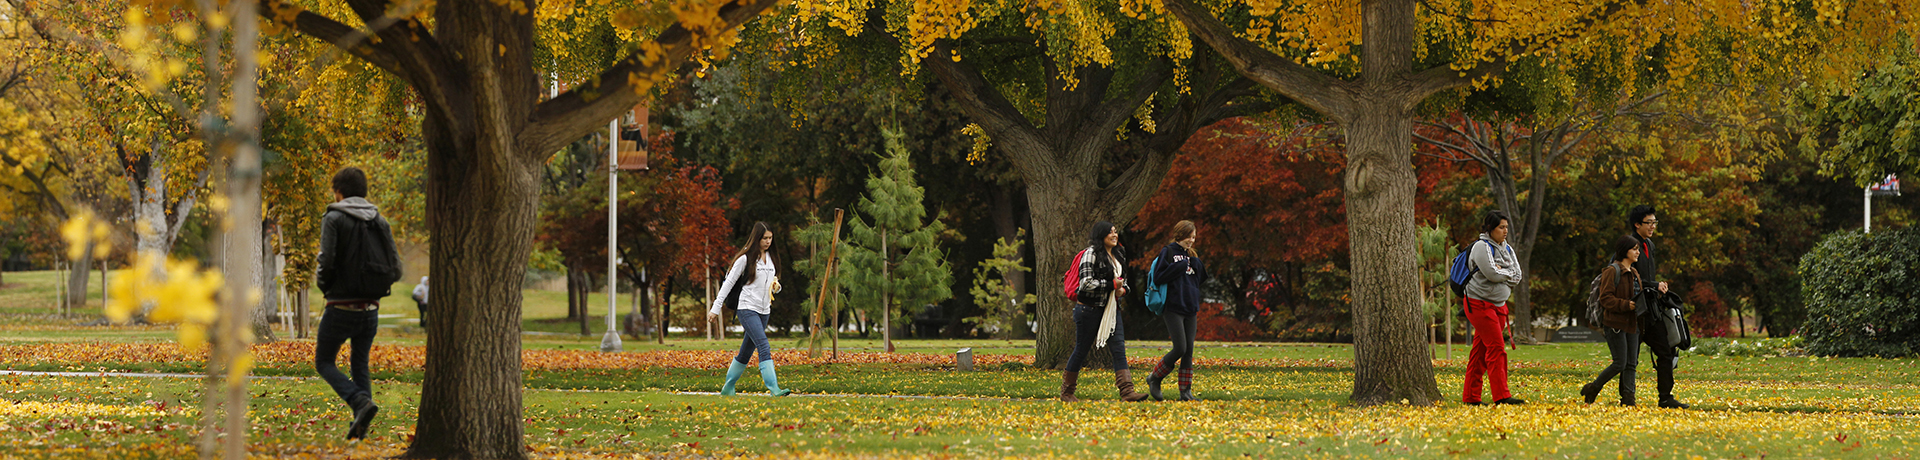 students walking in campus during the fall